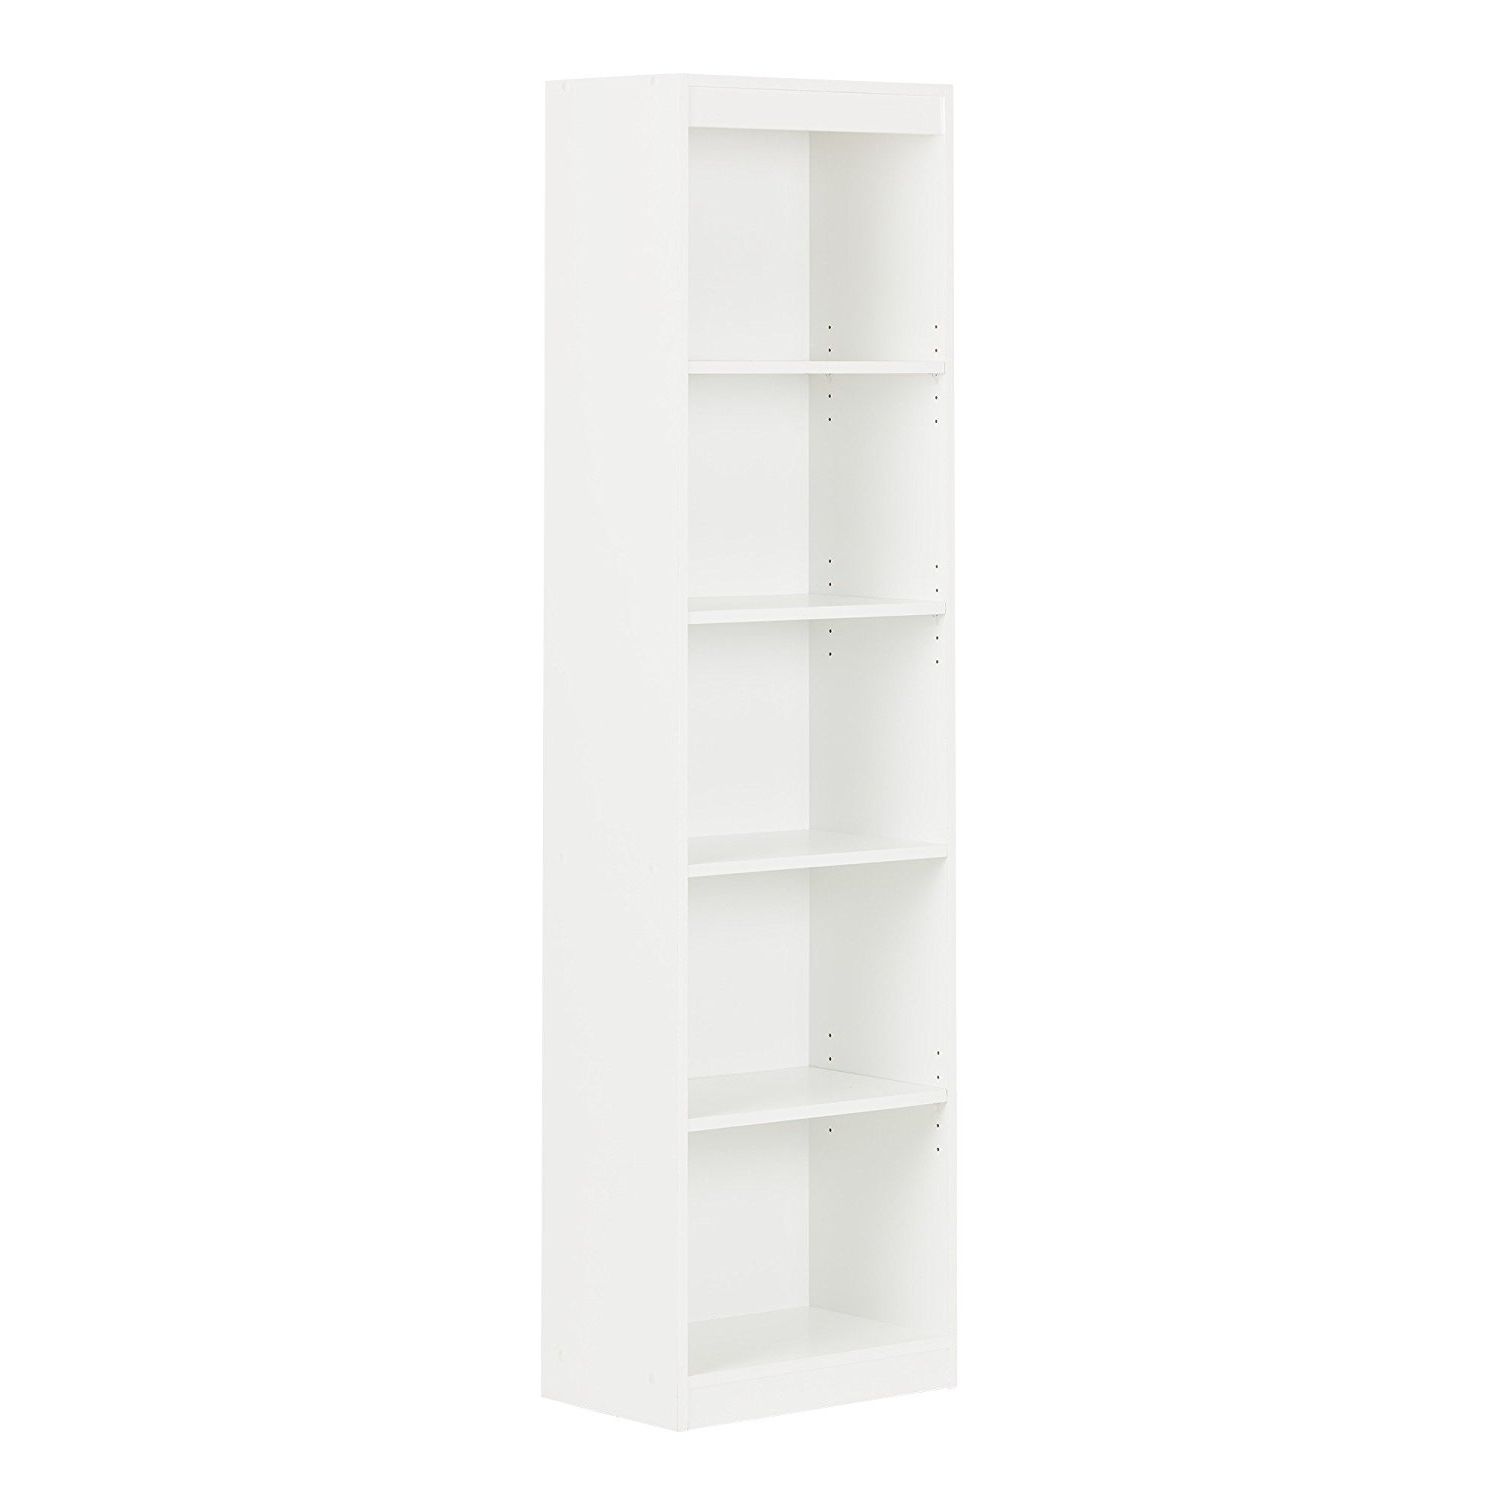 Narrow White Bookcases Intended For Current Amazon: South Shore Axess Collection 5 Shelf Narrow Bookcase (View 13 of 15)